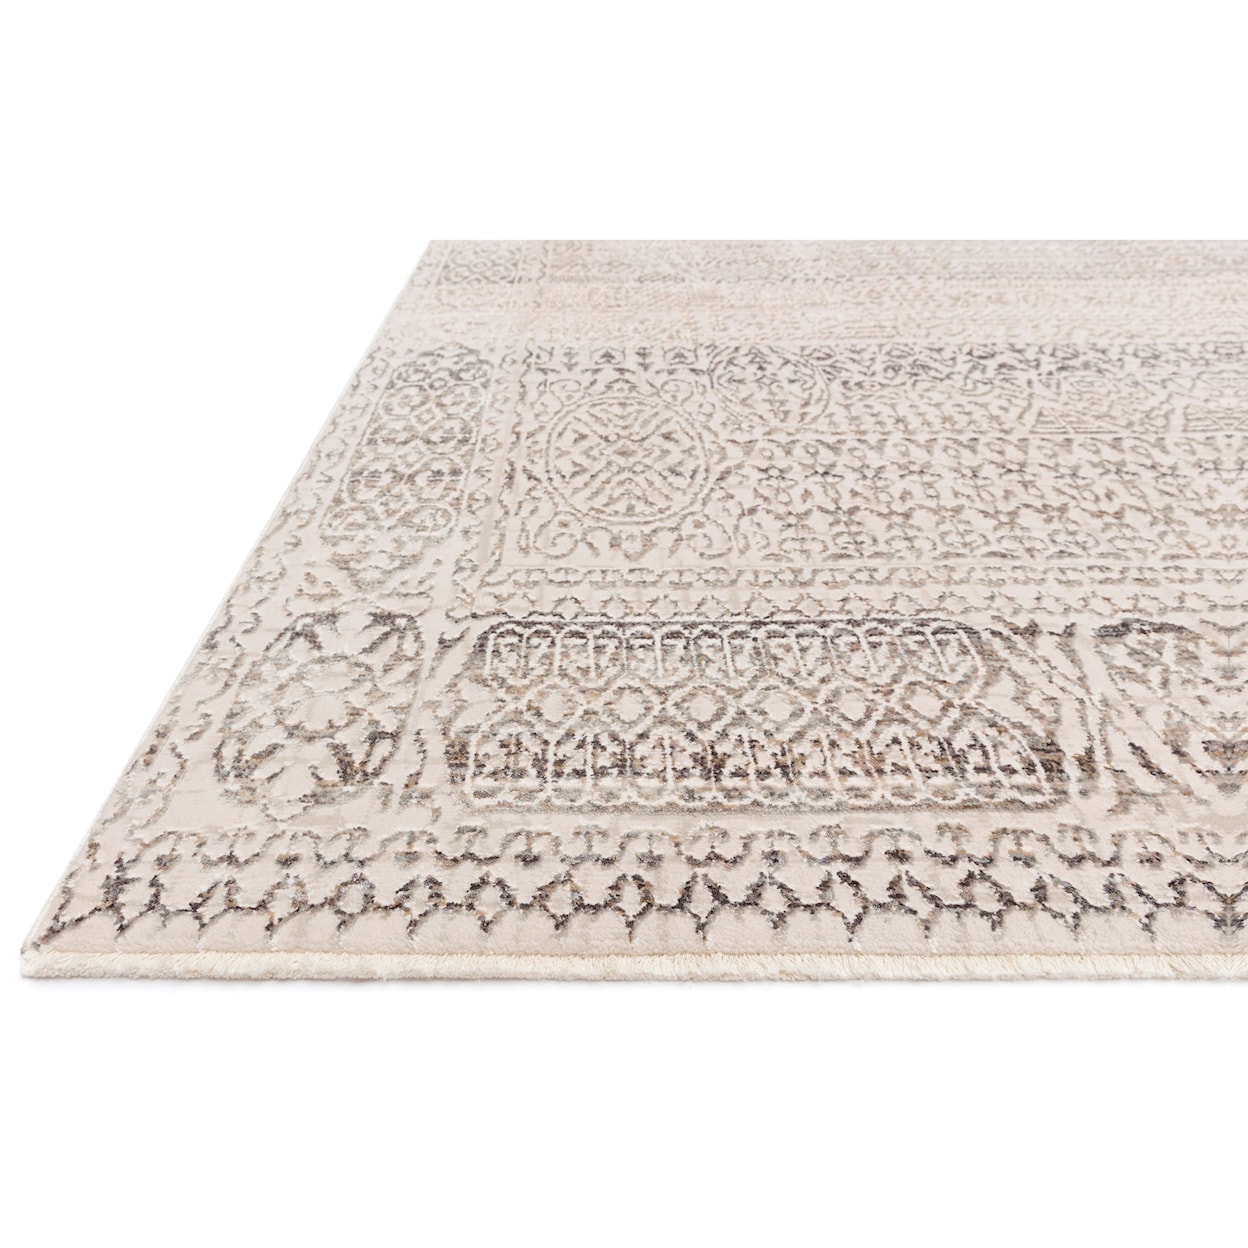 Reeds Rugs Homage 7'10" x 10' Ivory / Silver Rug